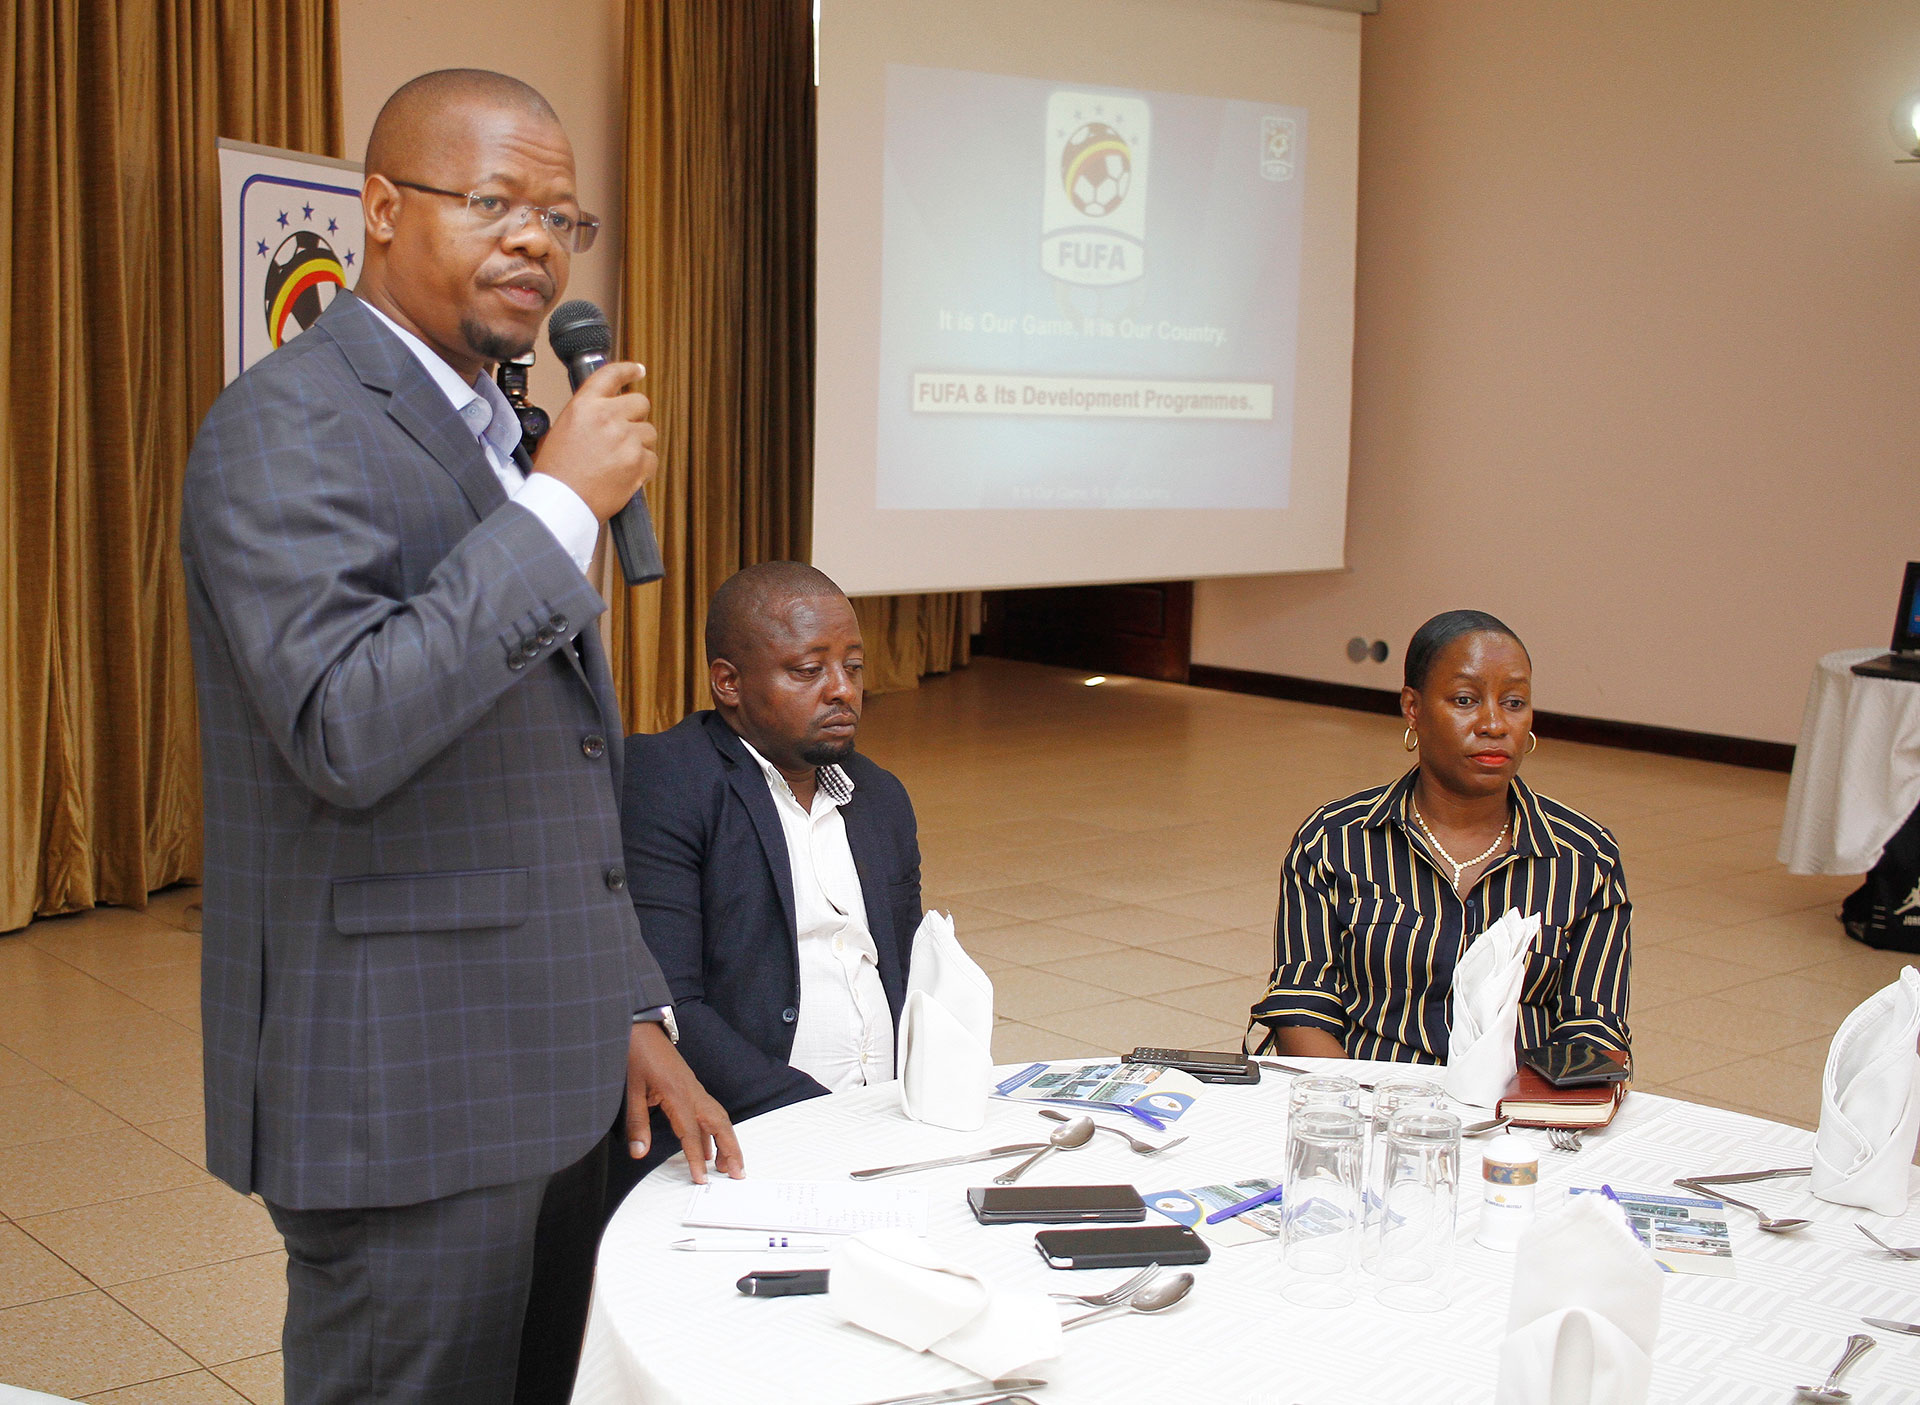 FUFA President Eng Moses Magogo while at the Elders' Forum 